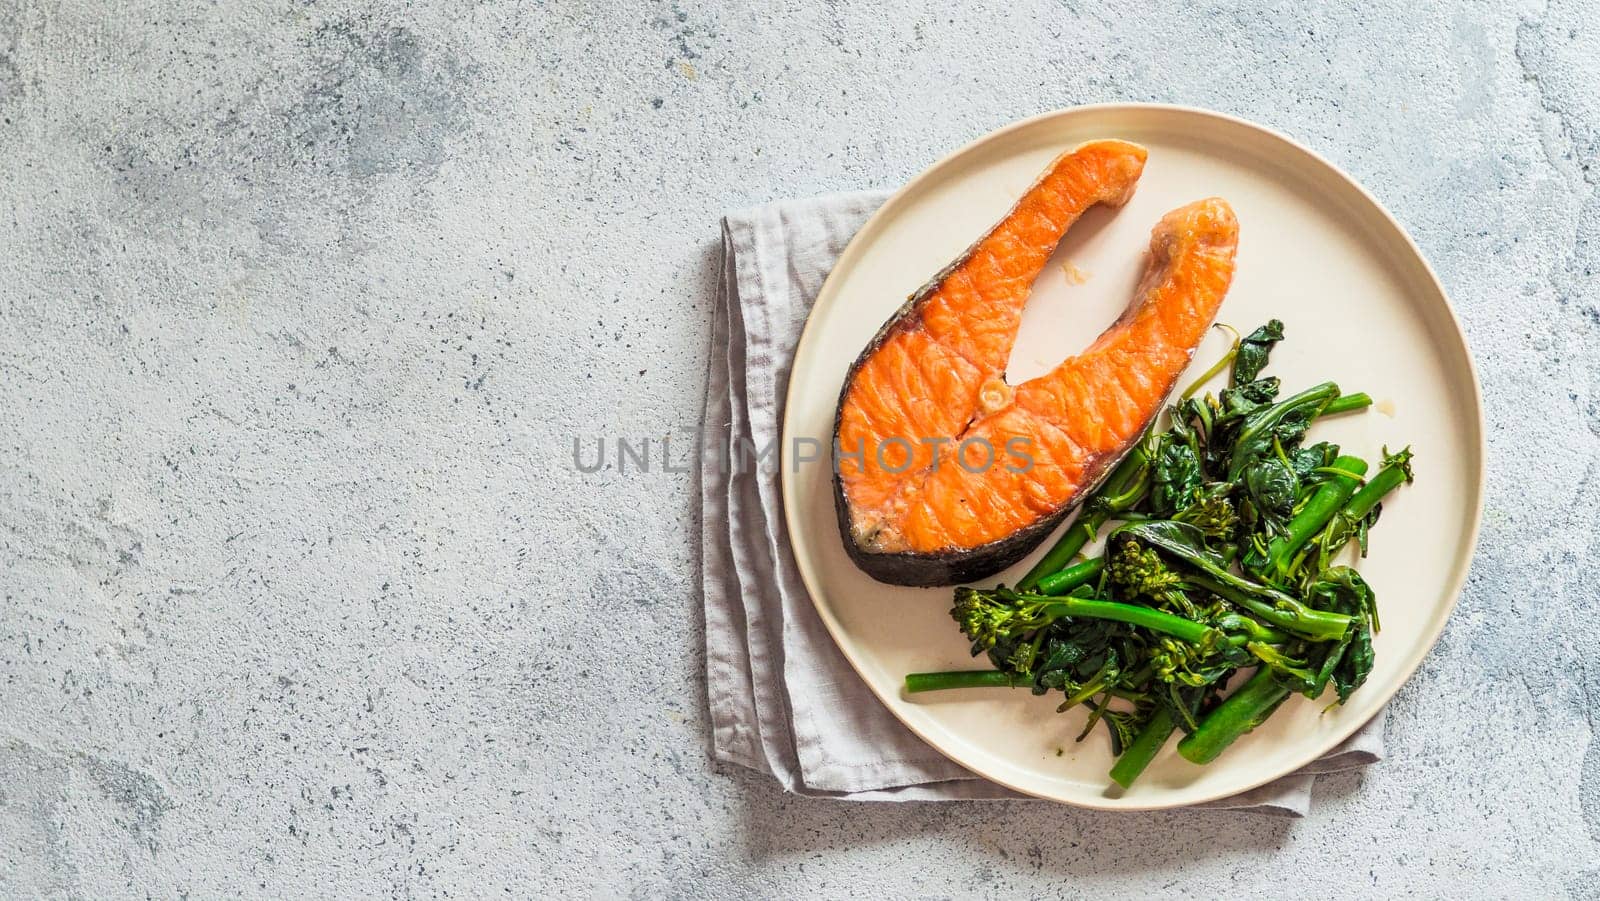 Ready-to-eat grilled salmon steak and greens - baby broccoli or broccolini and spinach on rustic craft plate over gray background. Keto diet dish. Top view or flat lay.Copy space left for text. Banner